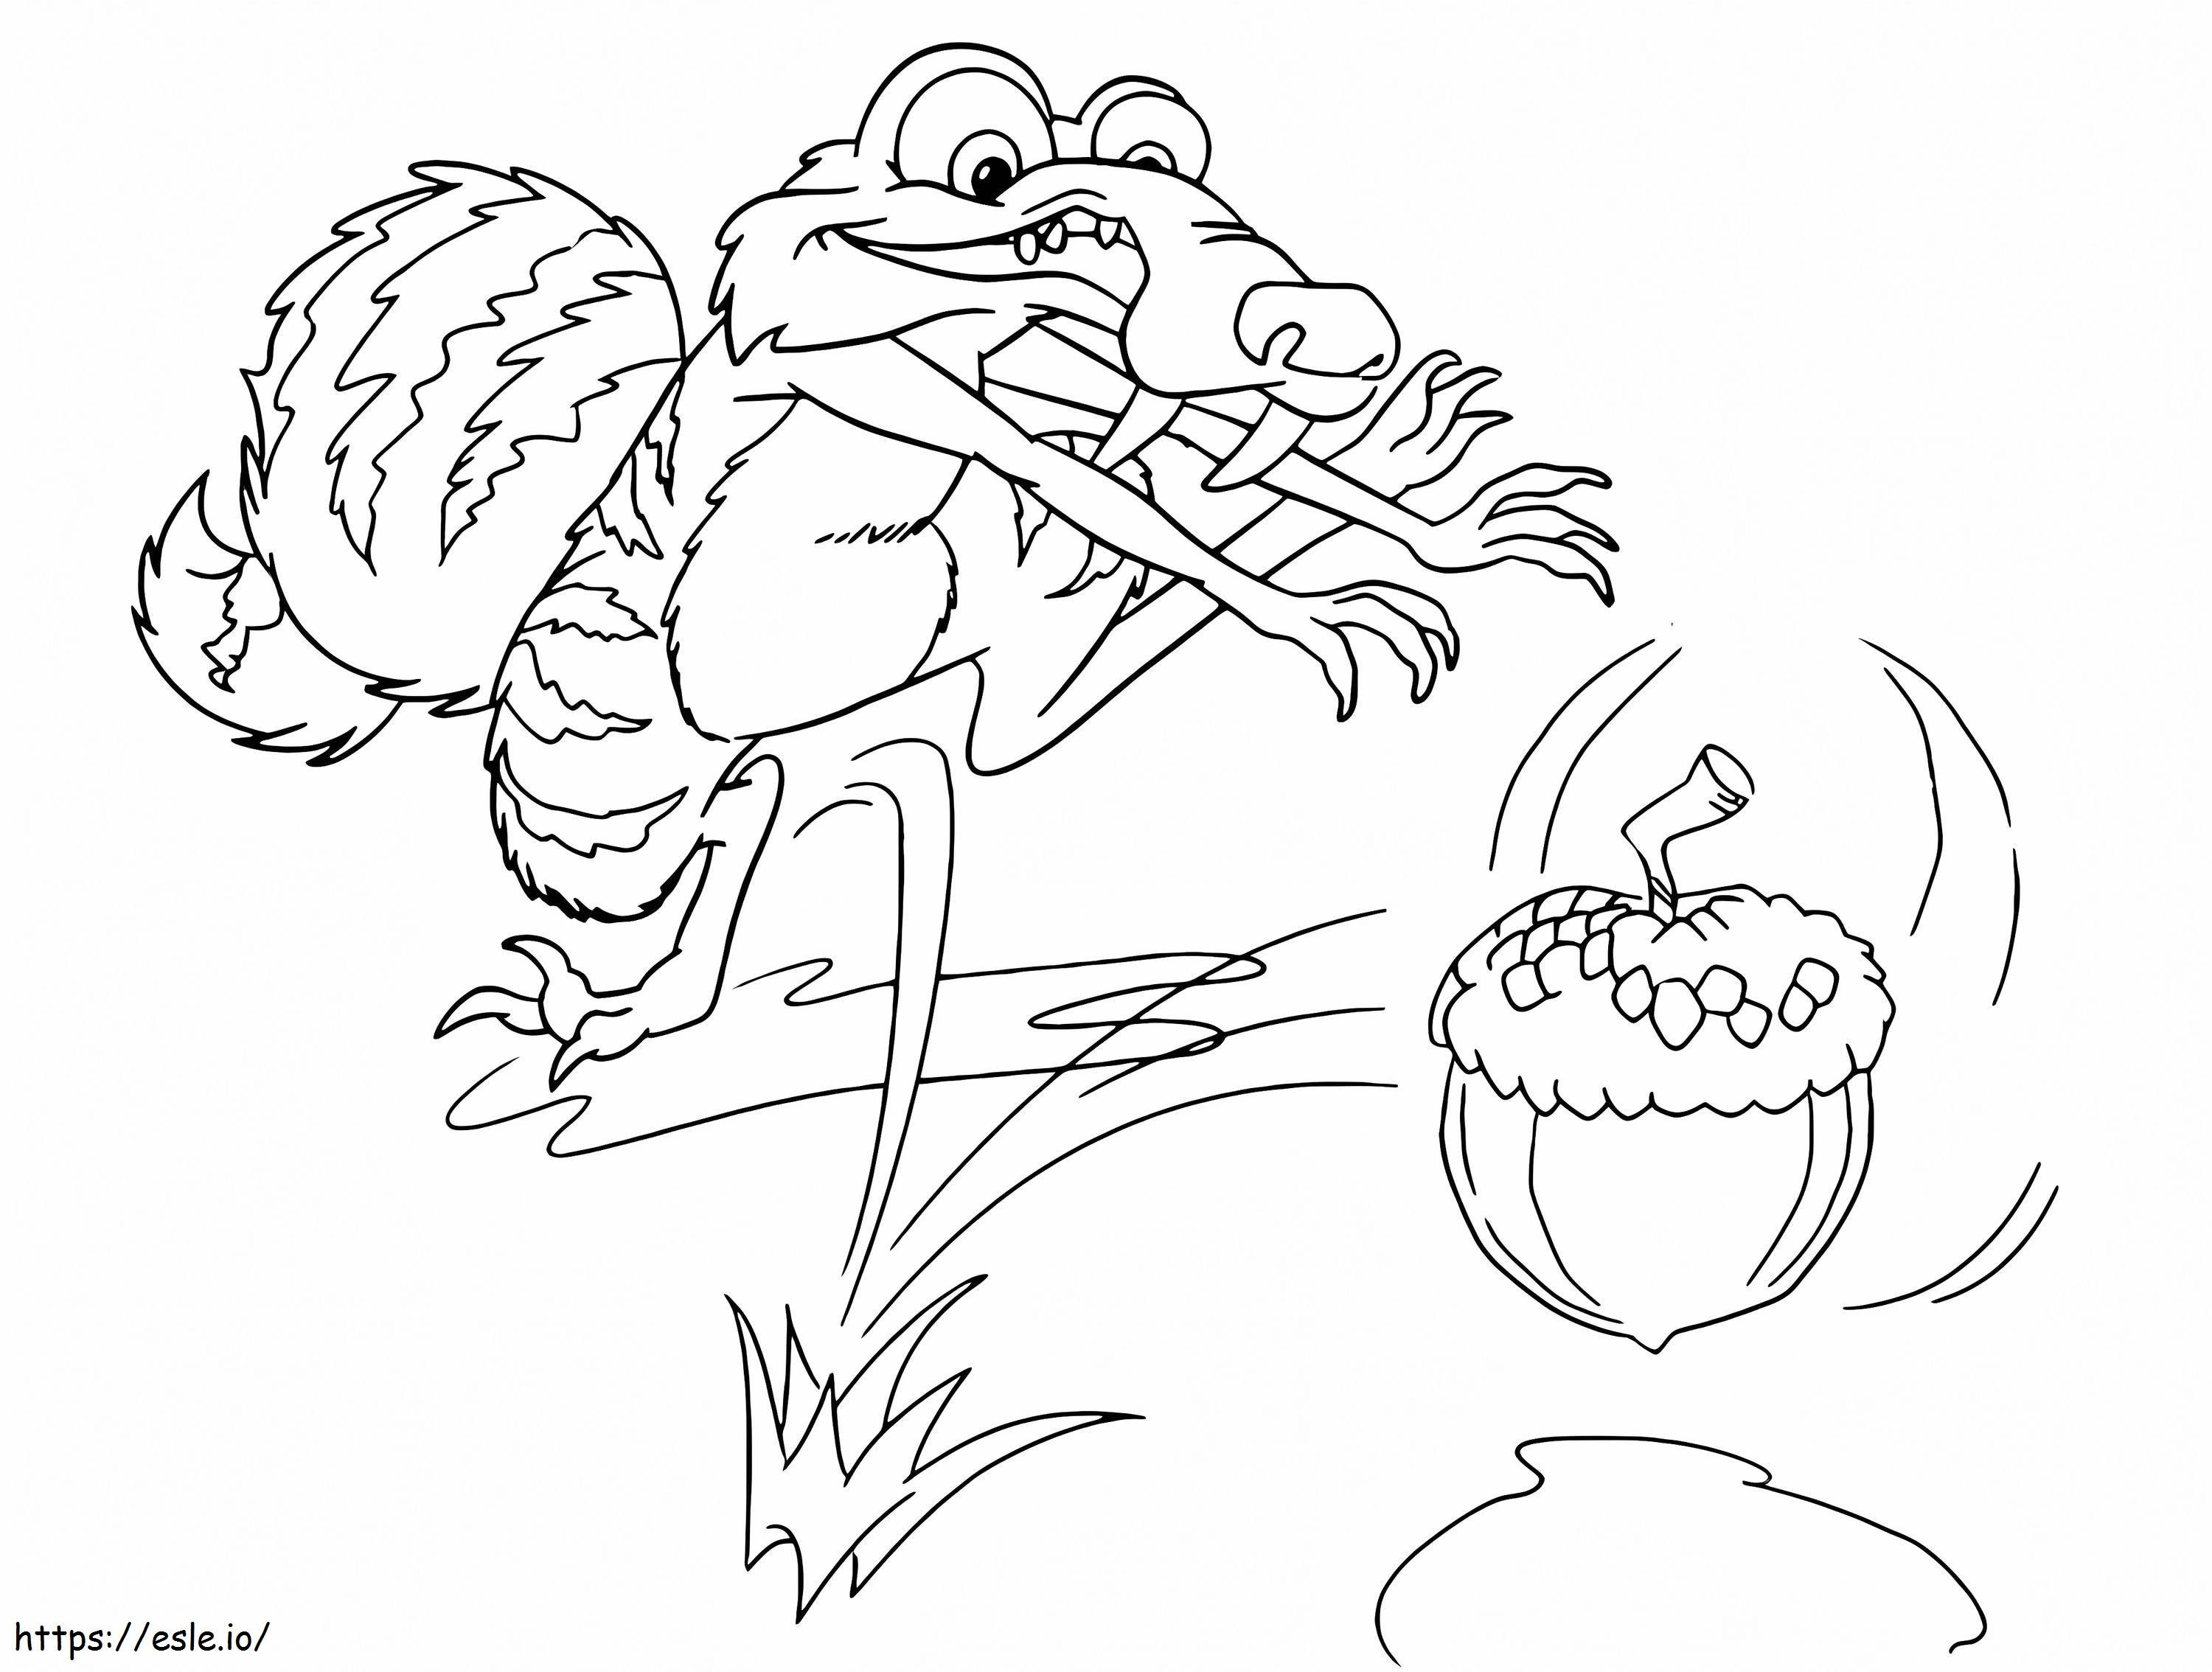 Scrat Chasing Acorn coloring page